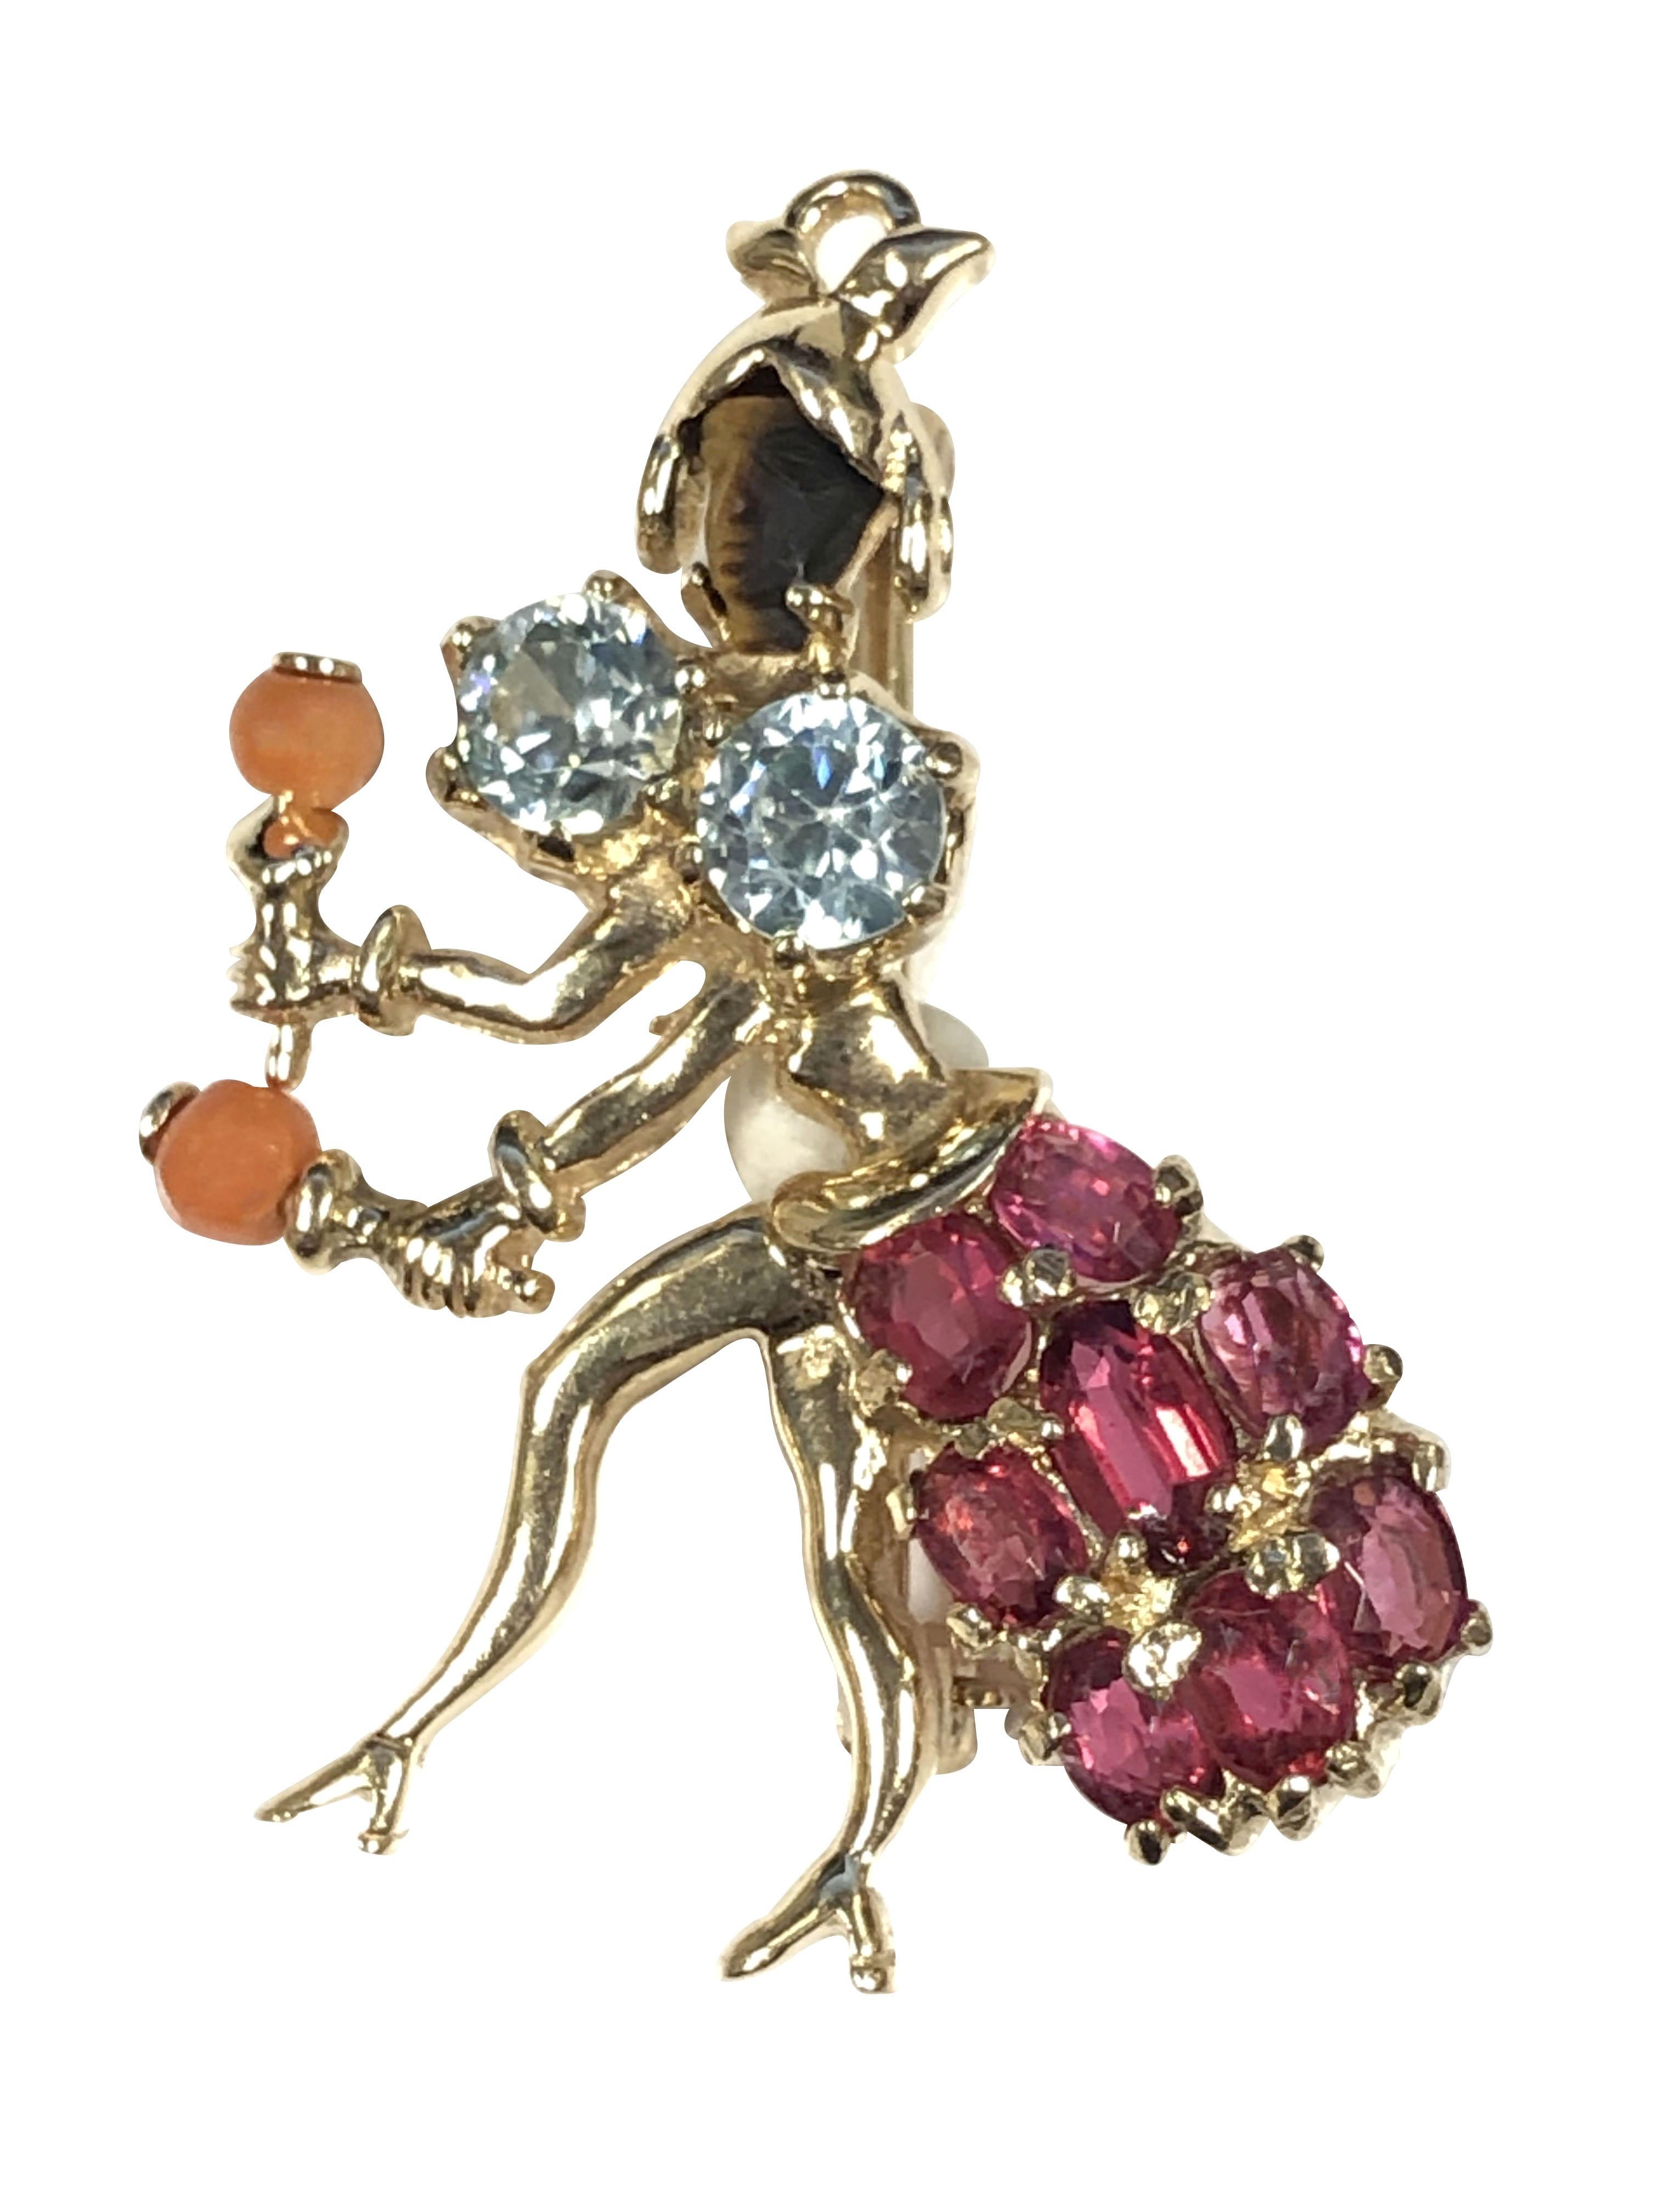 Circa 1940s Marimba Dancer brooches, these very whimsical and detailed Brooches are 14k Yellow Gold and each measure 1 1/2 inches in length X 1 inch, each is set with Rubies, Sapphires, Aquamarine, Coral, Rock Crystal and each has a carved face of